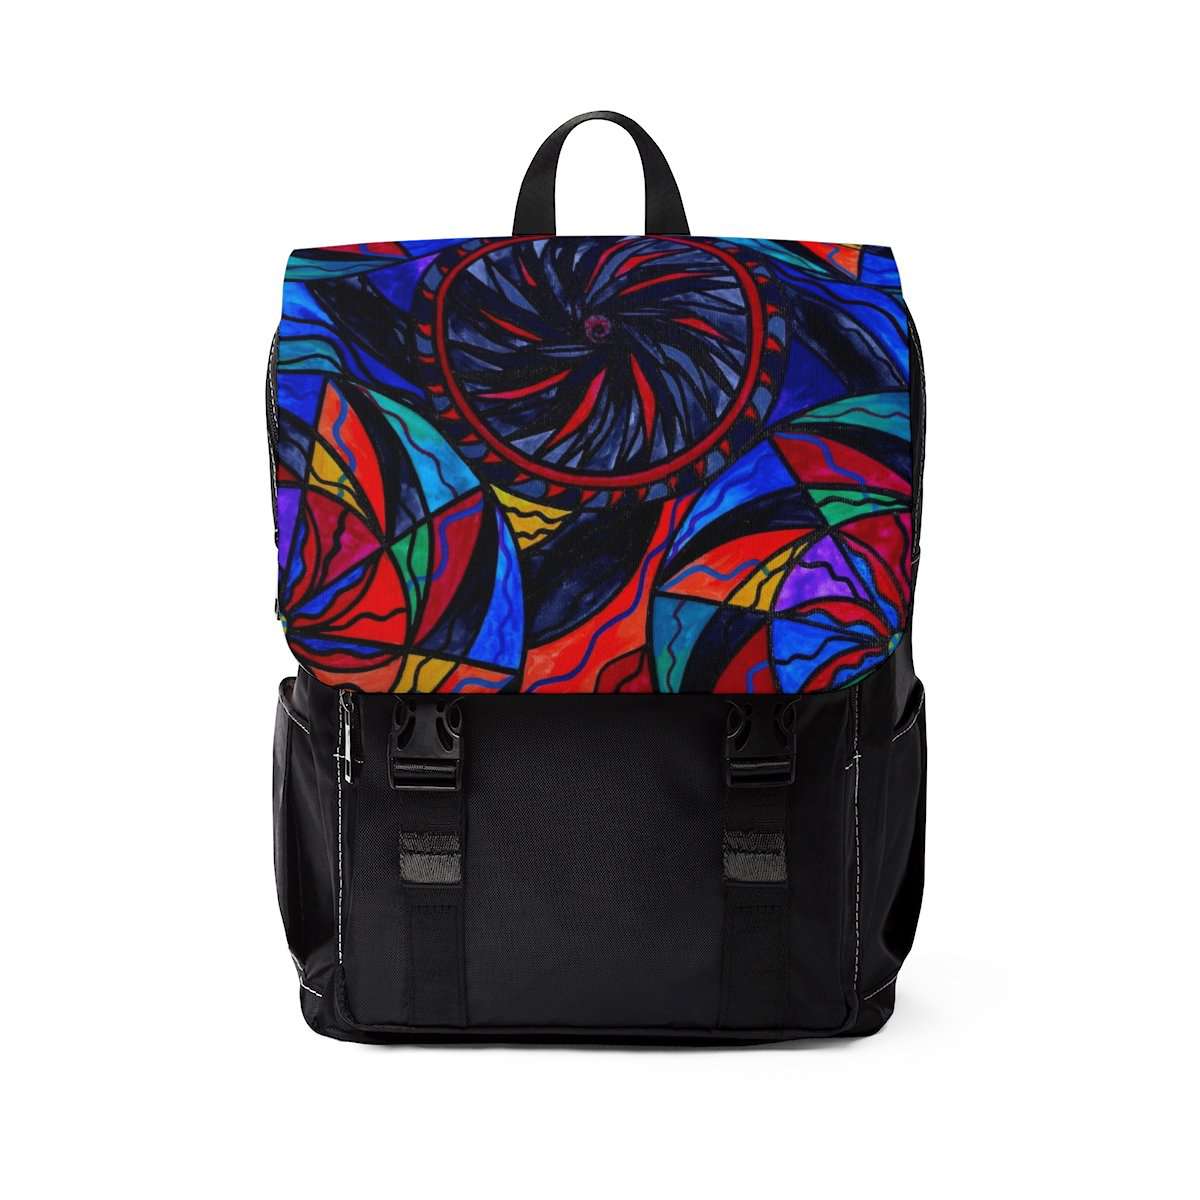 leaking-out-of-your-transforming-fear-unisex-casual-shoulder-backpack-hot-on-sale_0.jpg